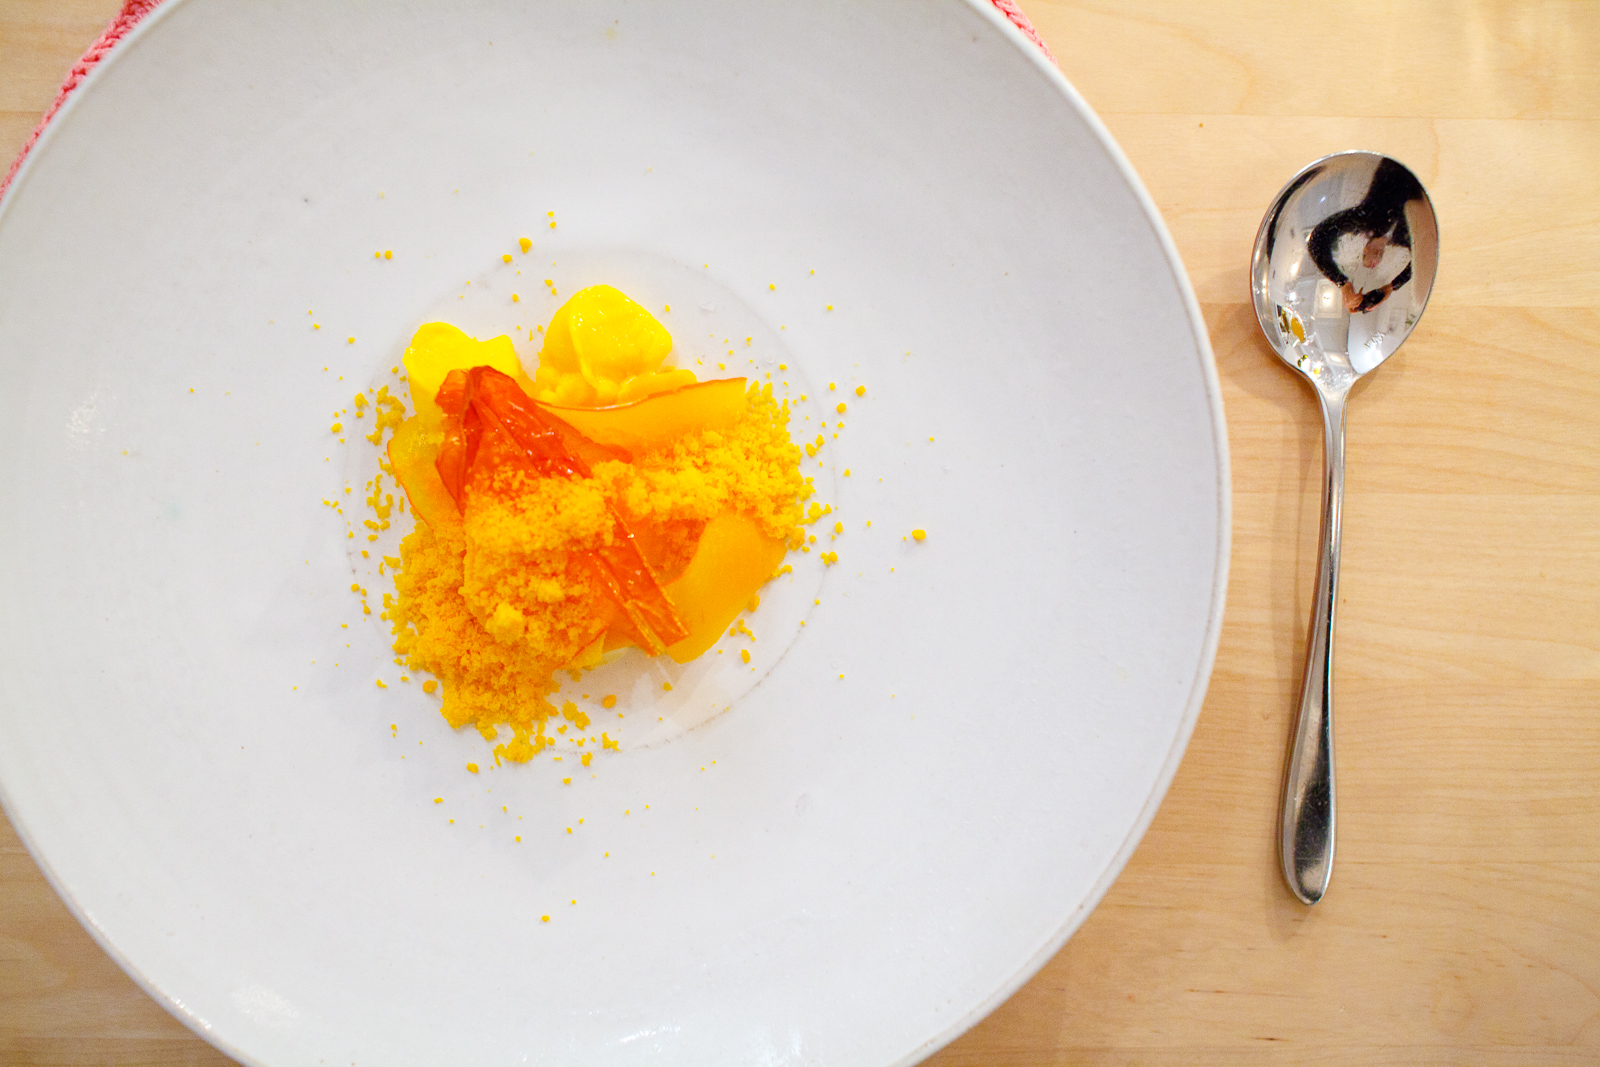 6th Course: Five textures of pumpkin